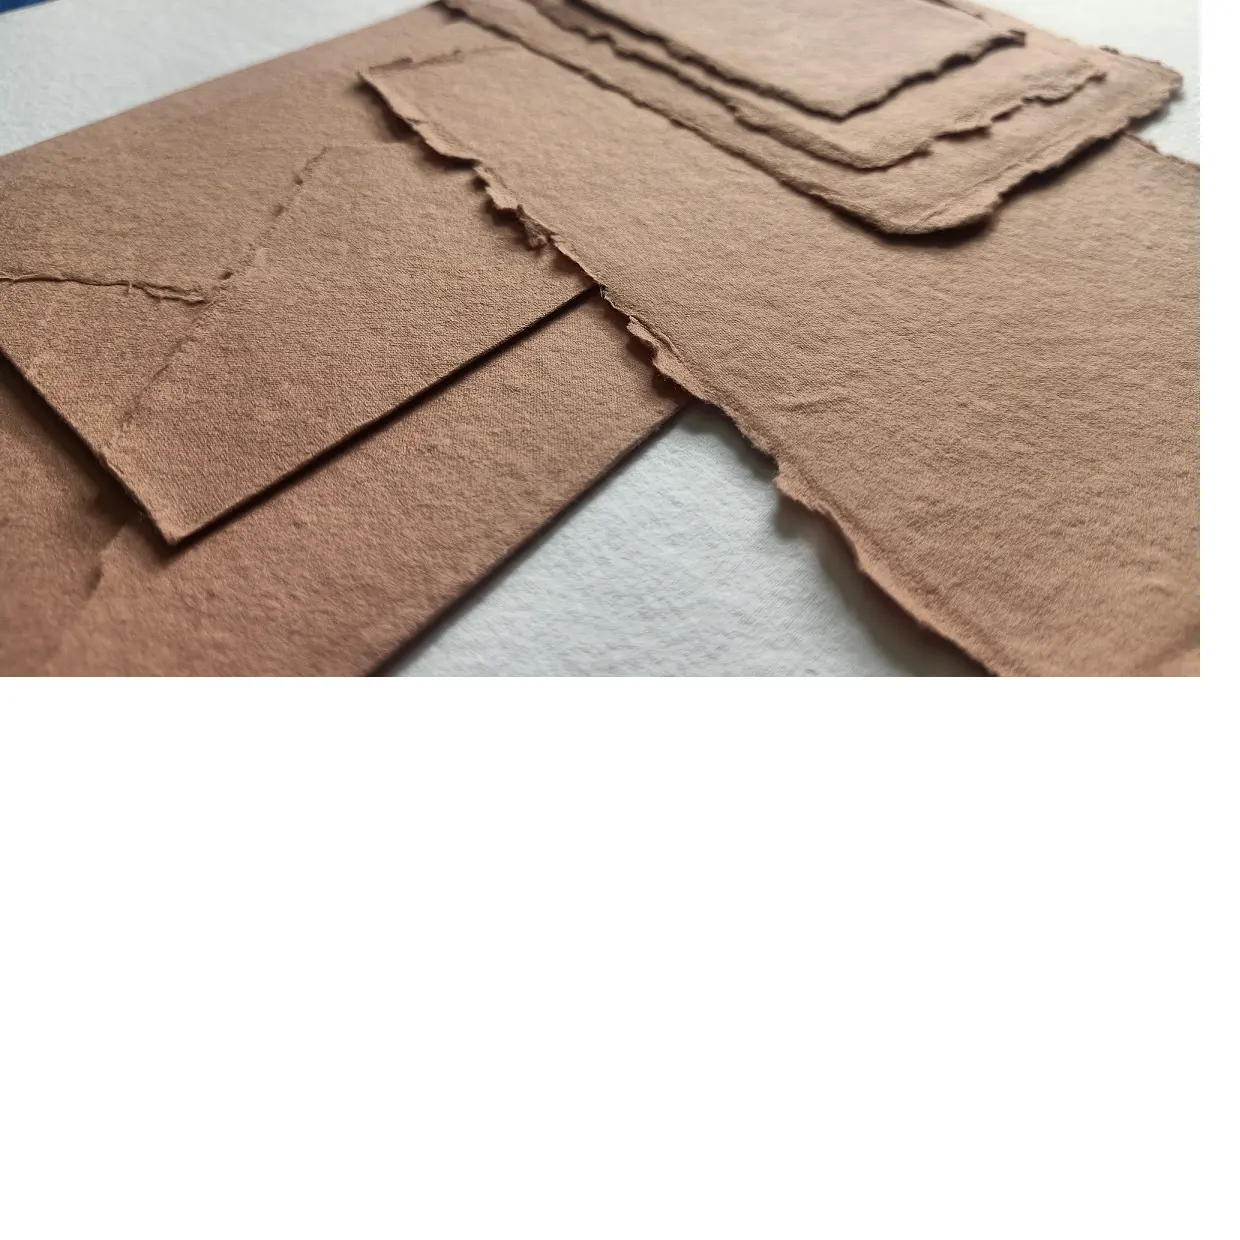 custom made deckle edged paper and envelopes in sand color suitable for use by wedding stationers and invitation designers